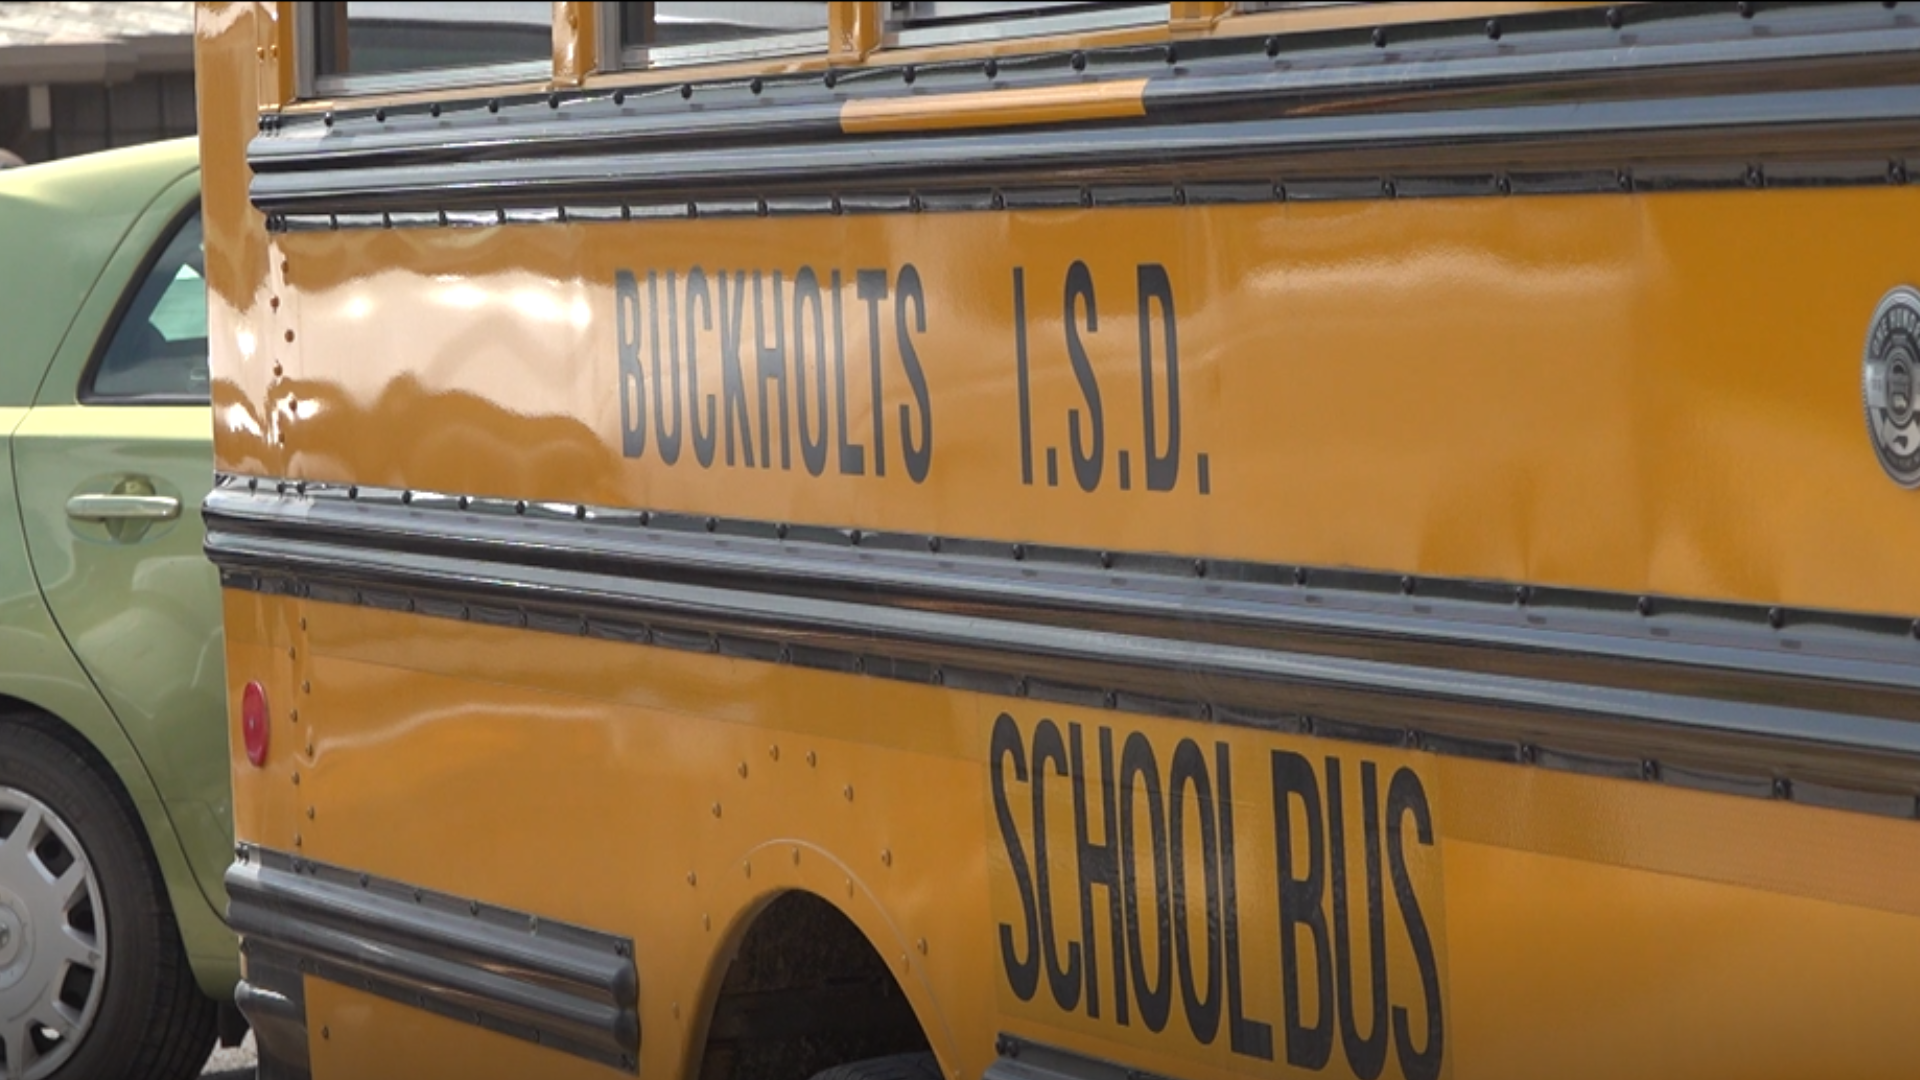 Buckholts ISD made headlines two years ago when their small district was on the verge of closing. Now, the district boasts an A rating, and it's not stopping there.